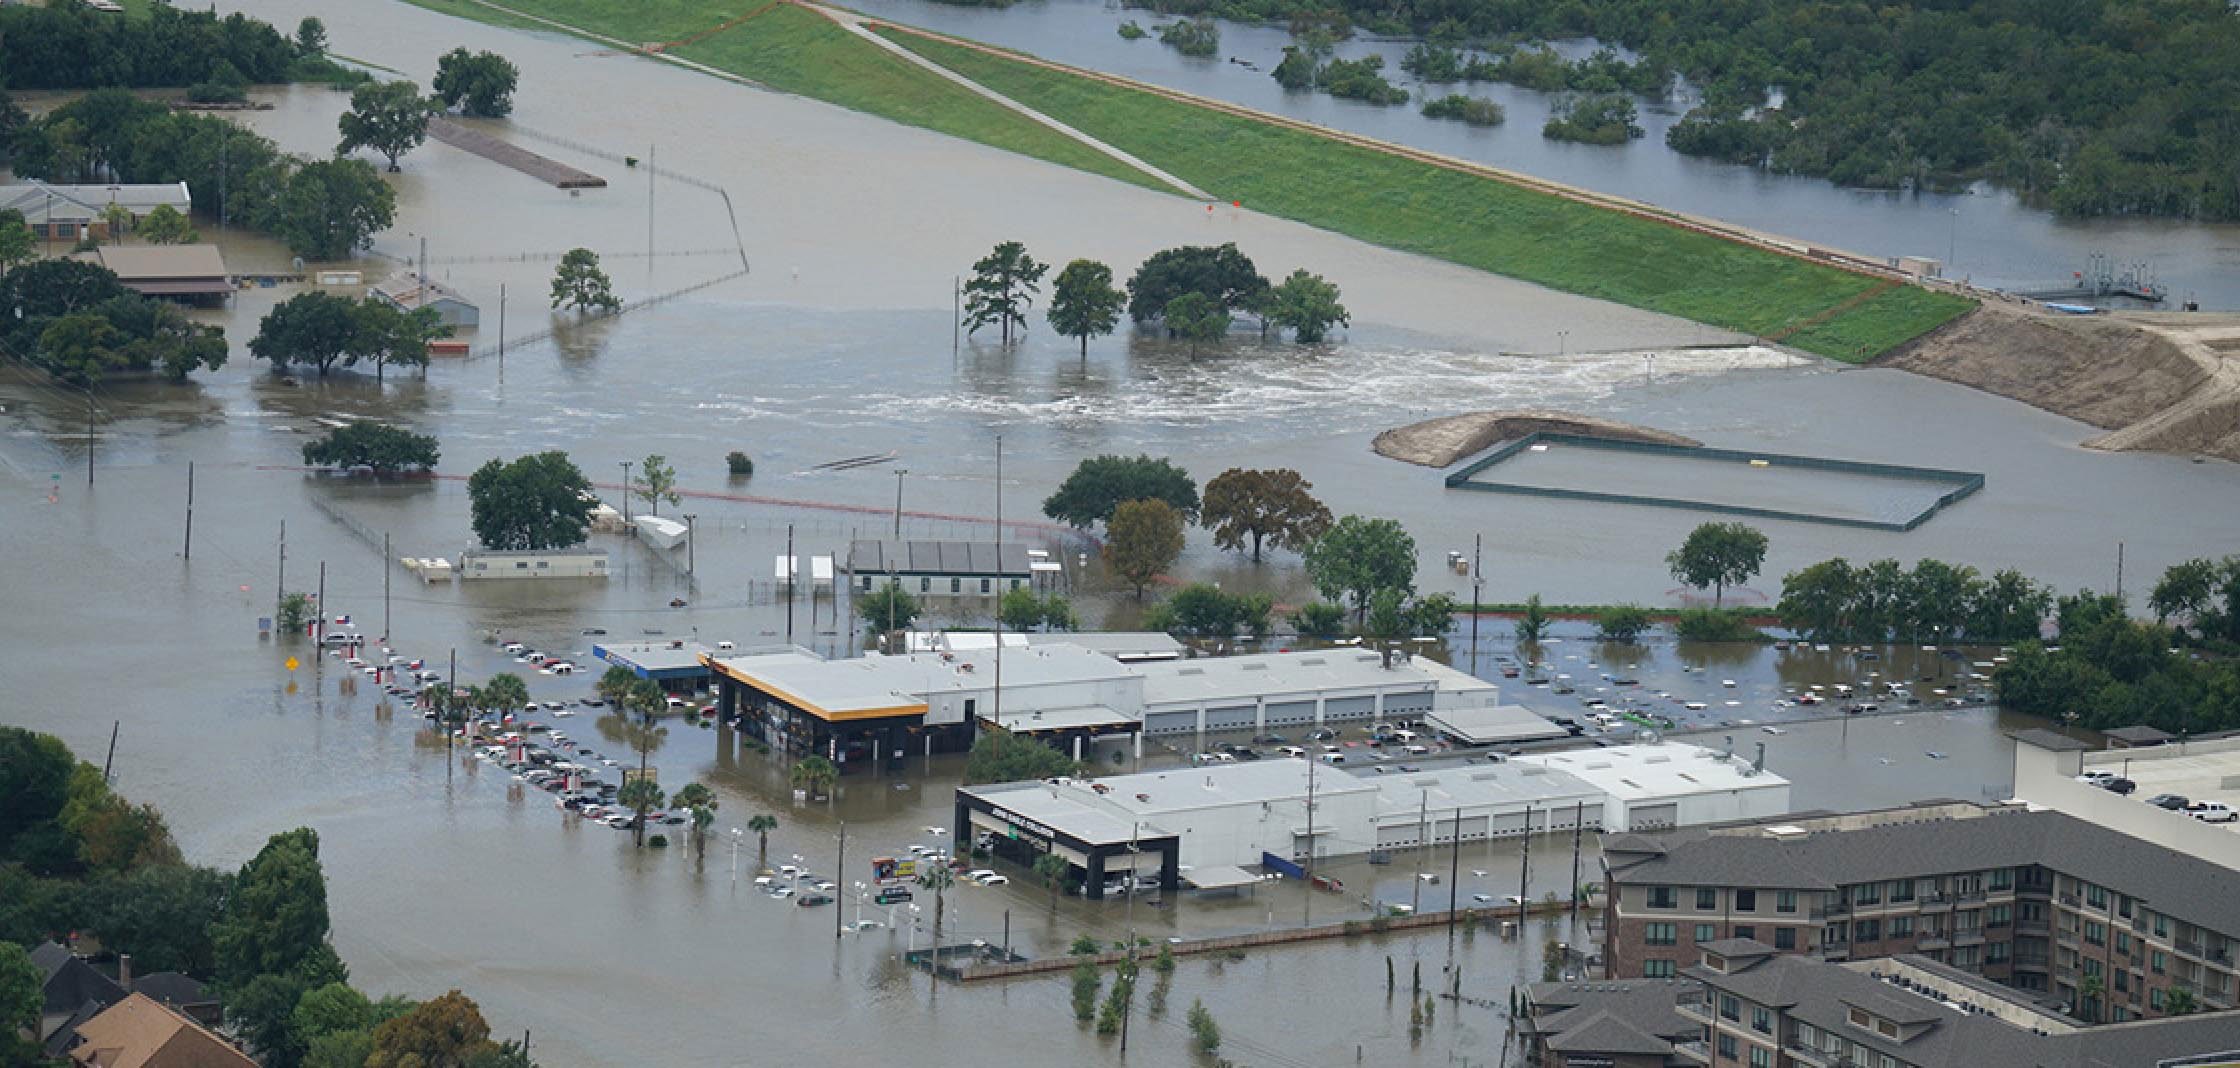 Barker Flood Control Reservoir during Hurricane Harvey in 2017. The new National Oceanic and Atmospheric Administration (NOAA) Atlas 14 tells us the 100-year storm is now the 25-year storm for over 12 million Texans.